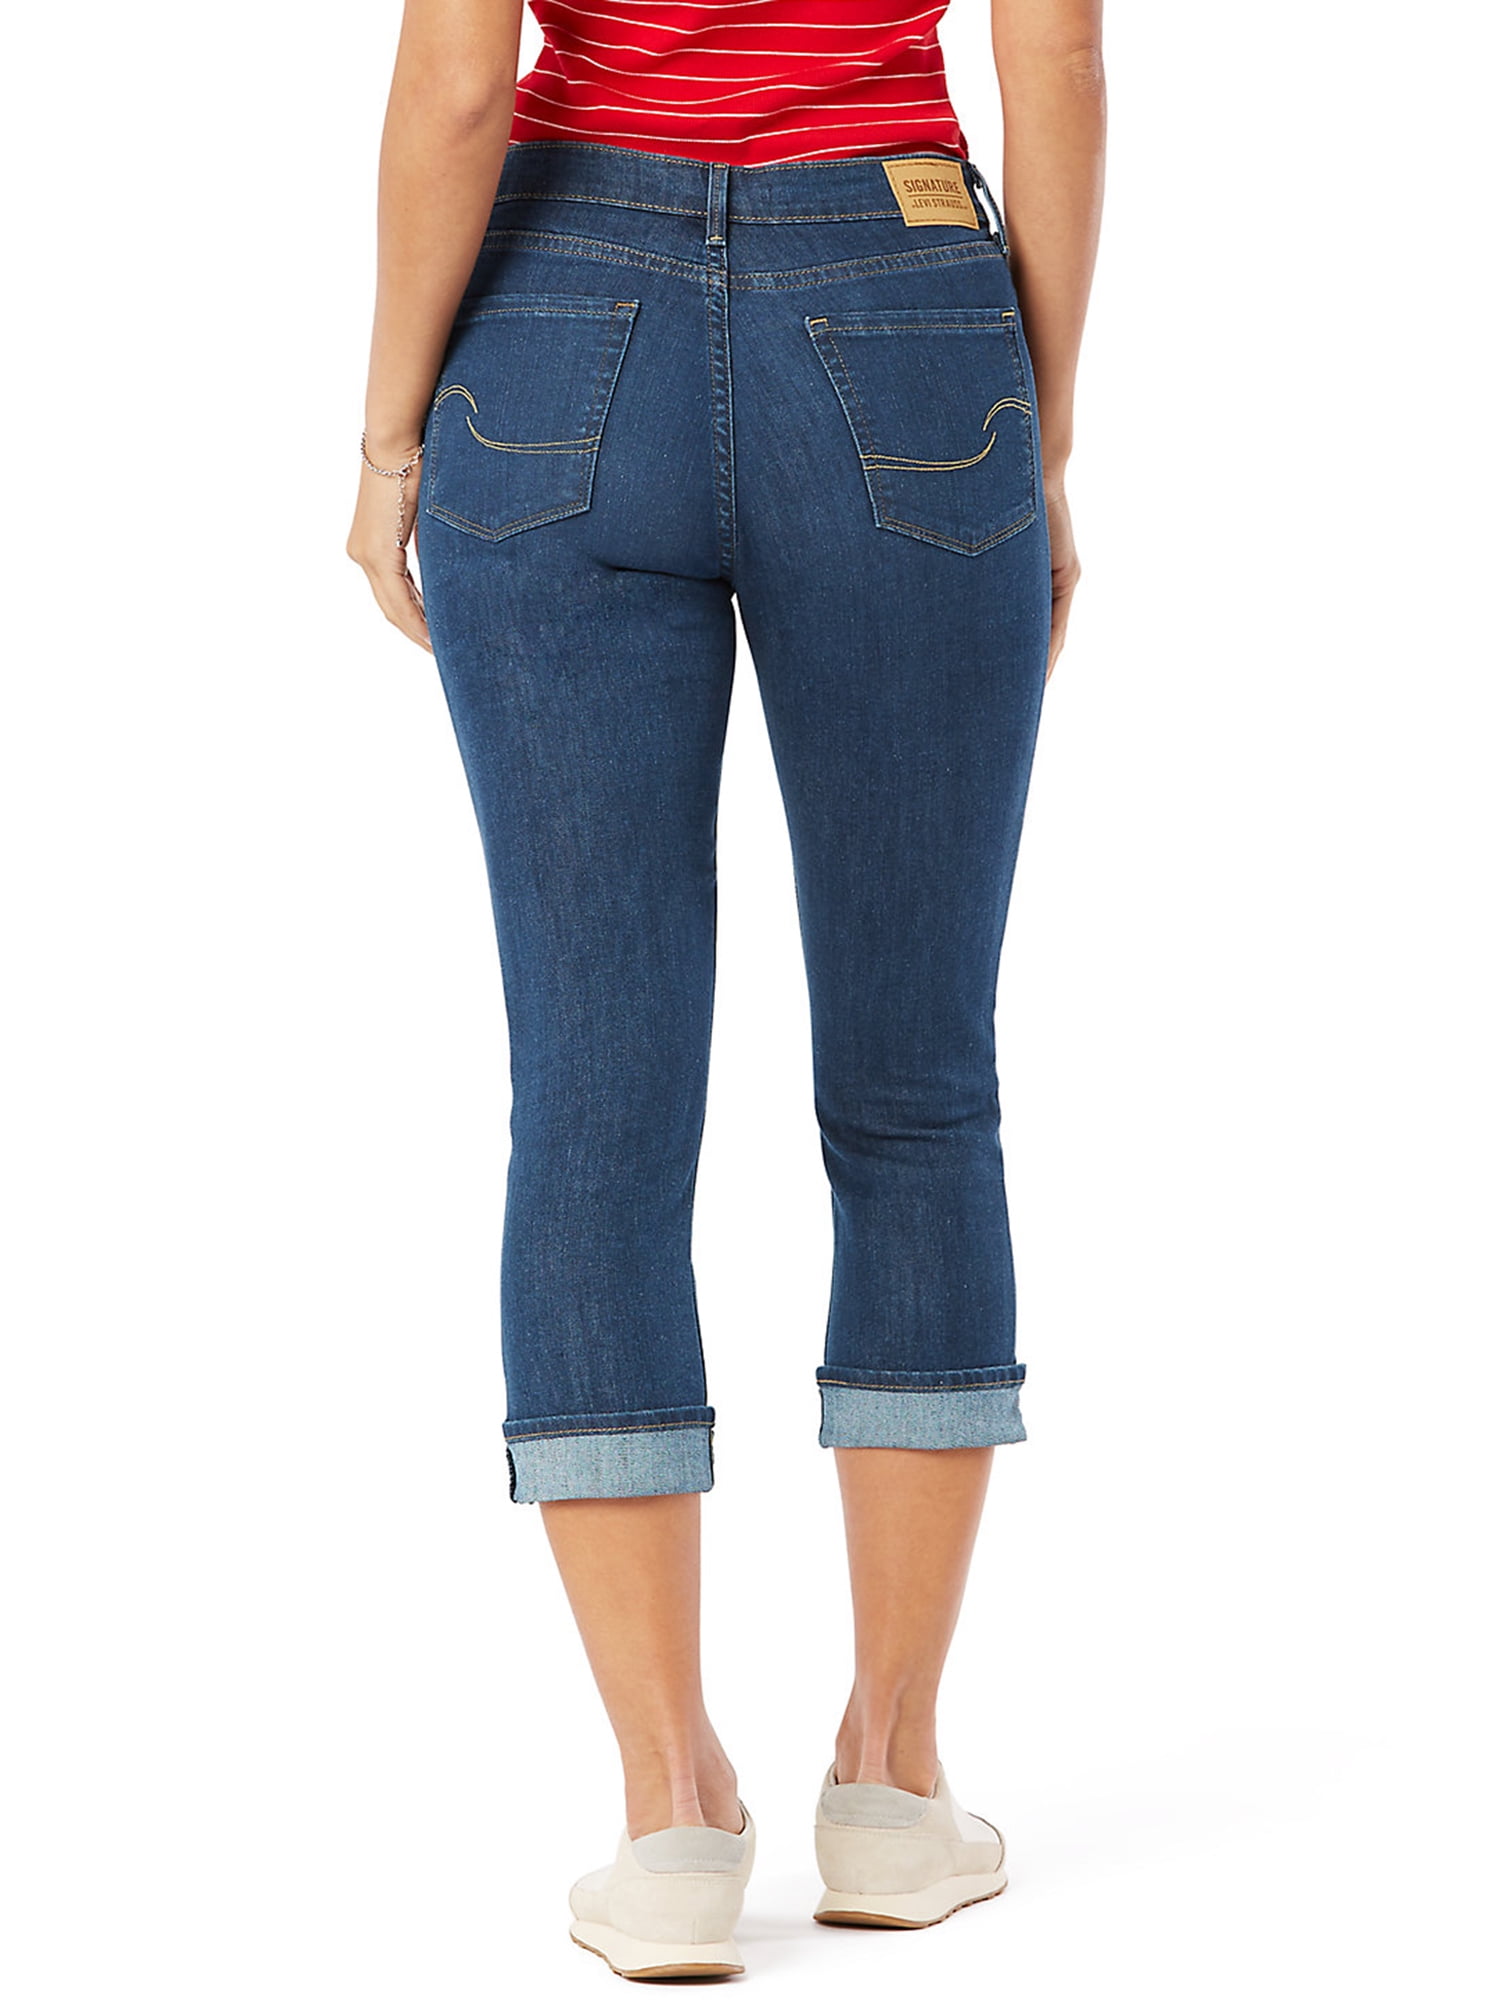 Signature by Levi Strauss & Co. Women's Mid Rise Capri Jeans 